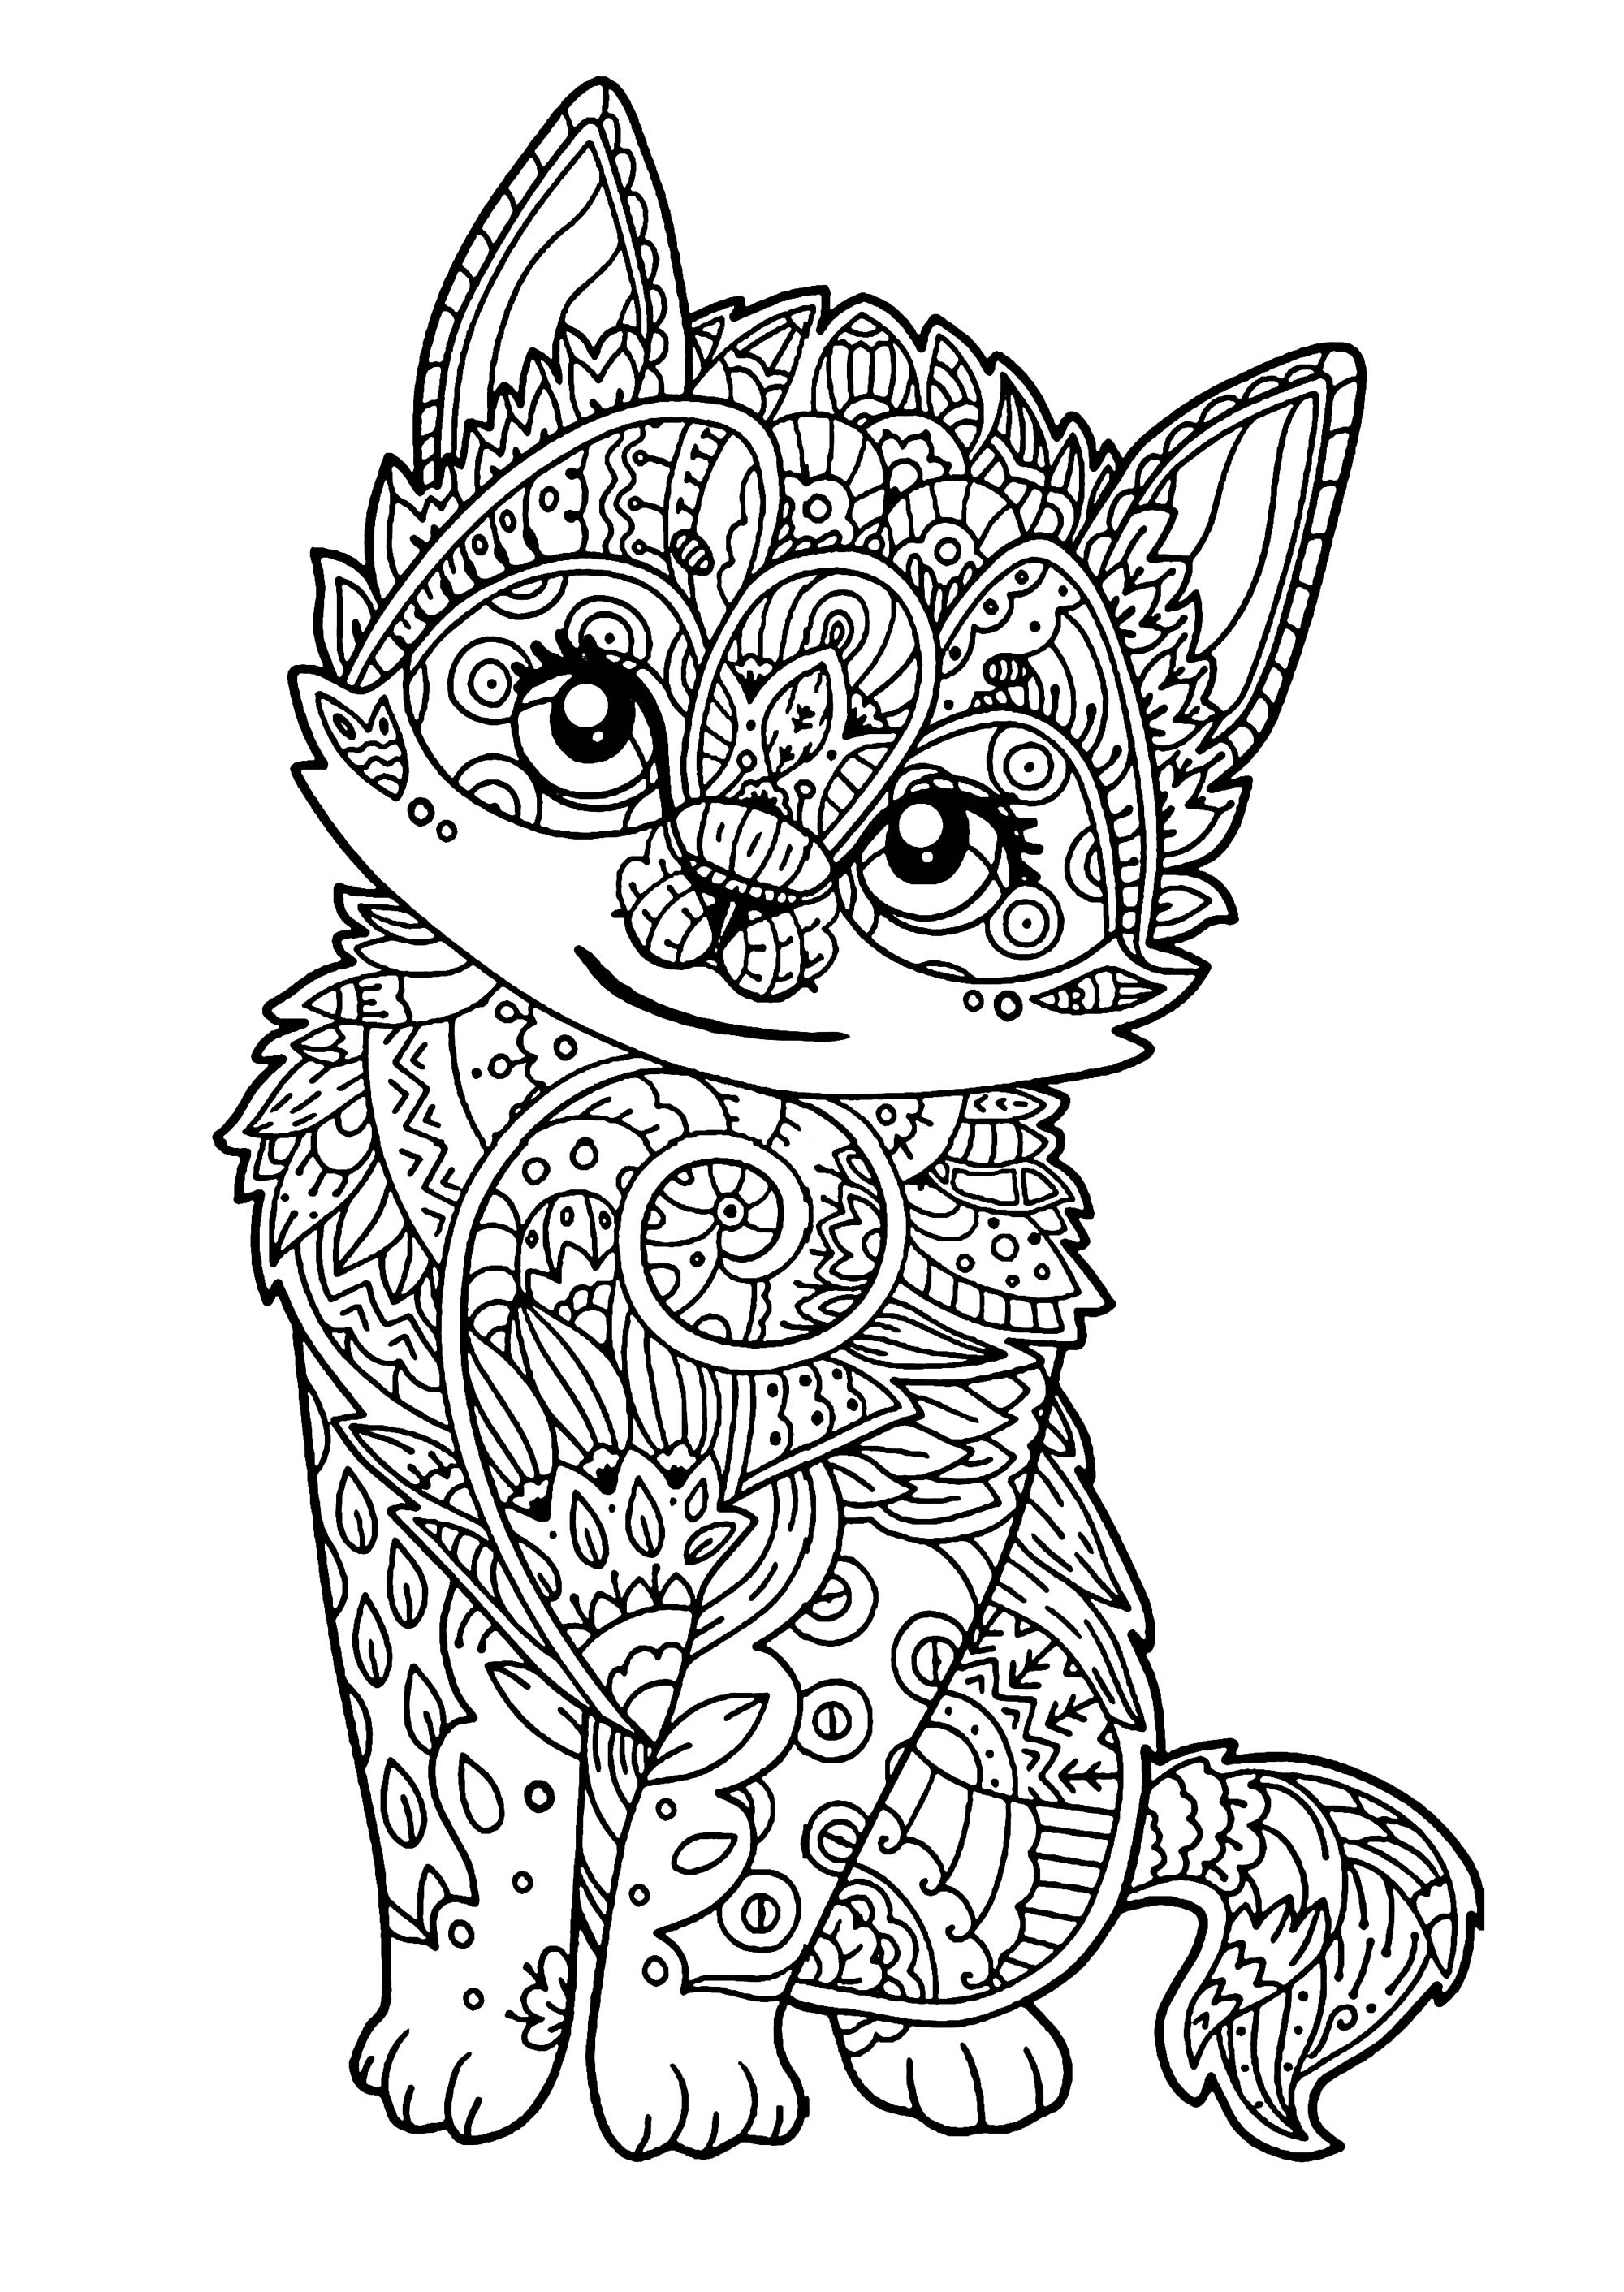 Cat for kids Little kitten Cats Kids Coloring Pages